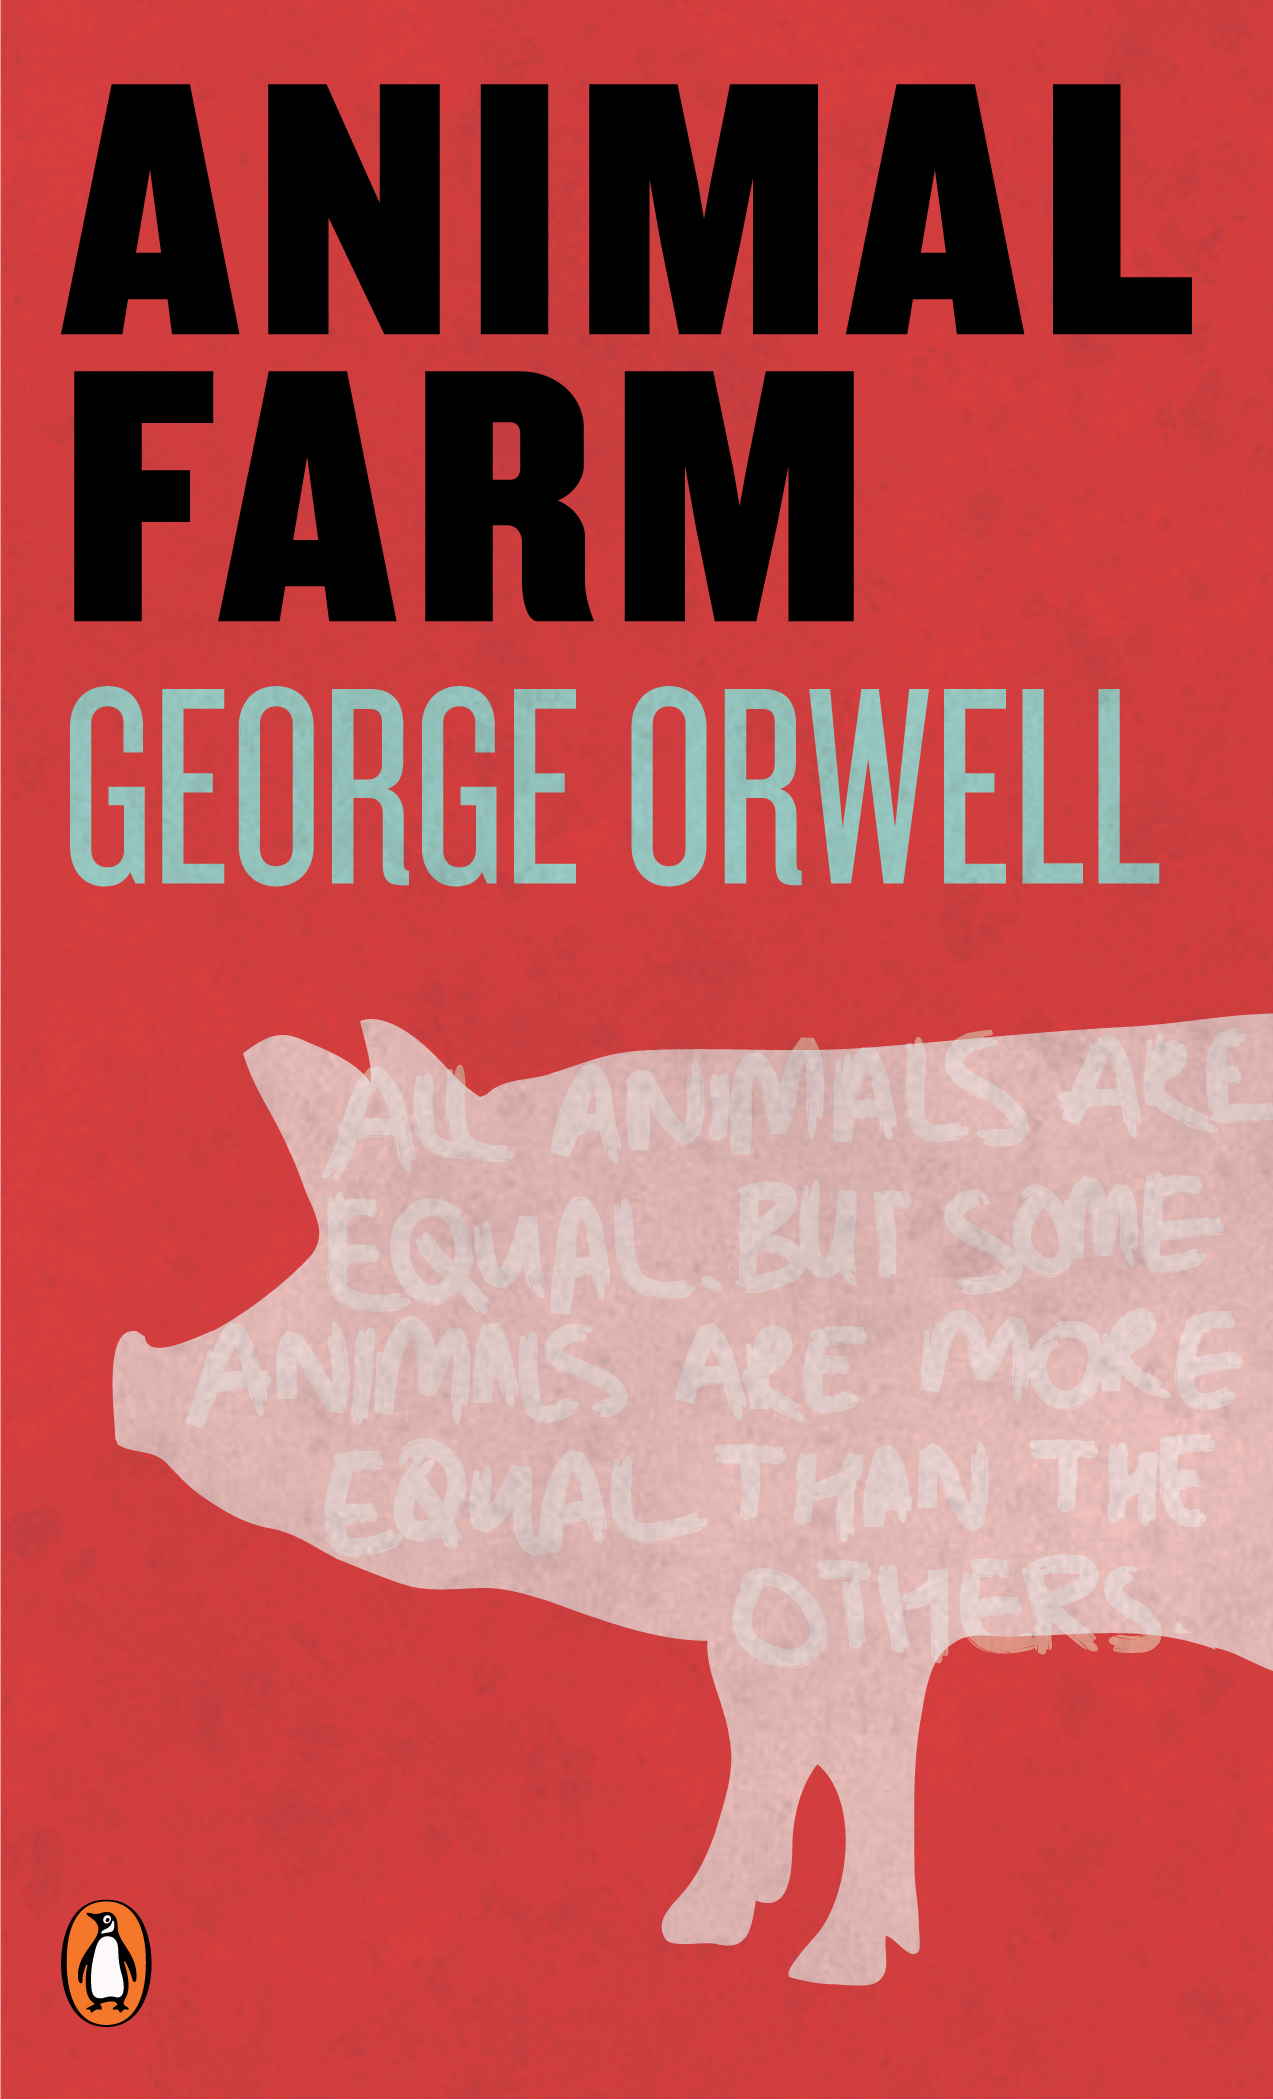 Animal Farm, by George Orwell - book to read before you die